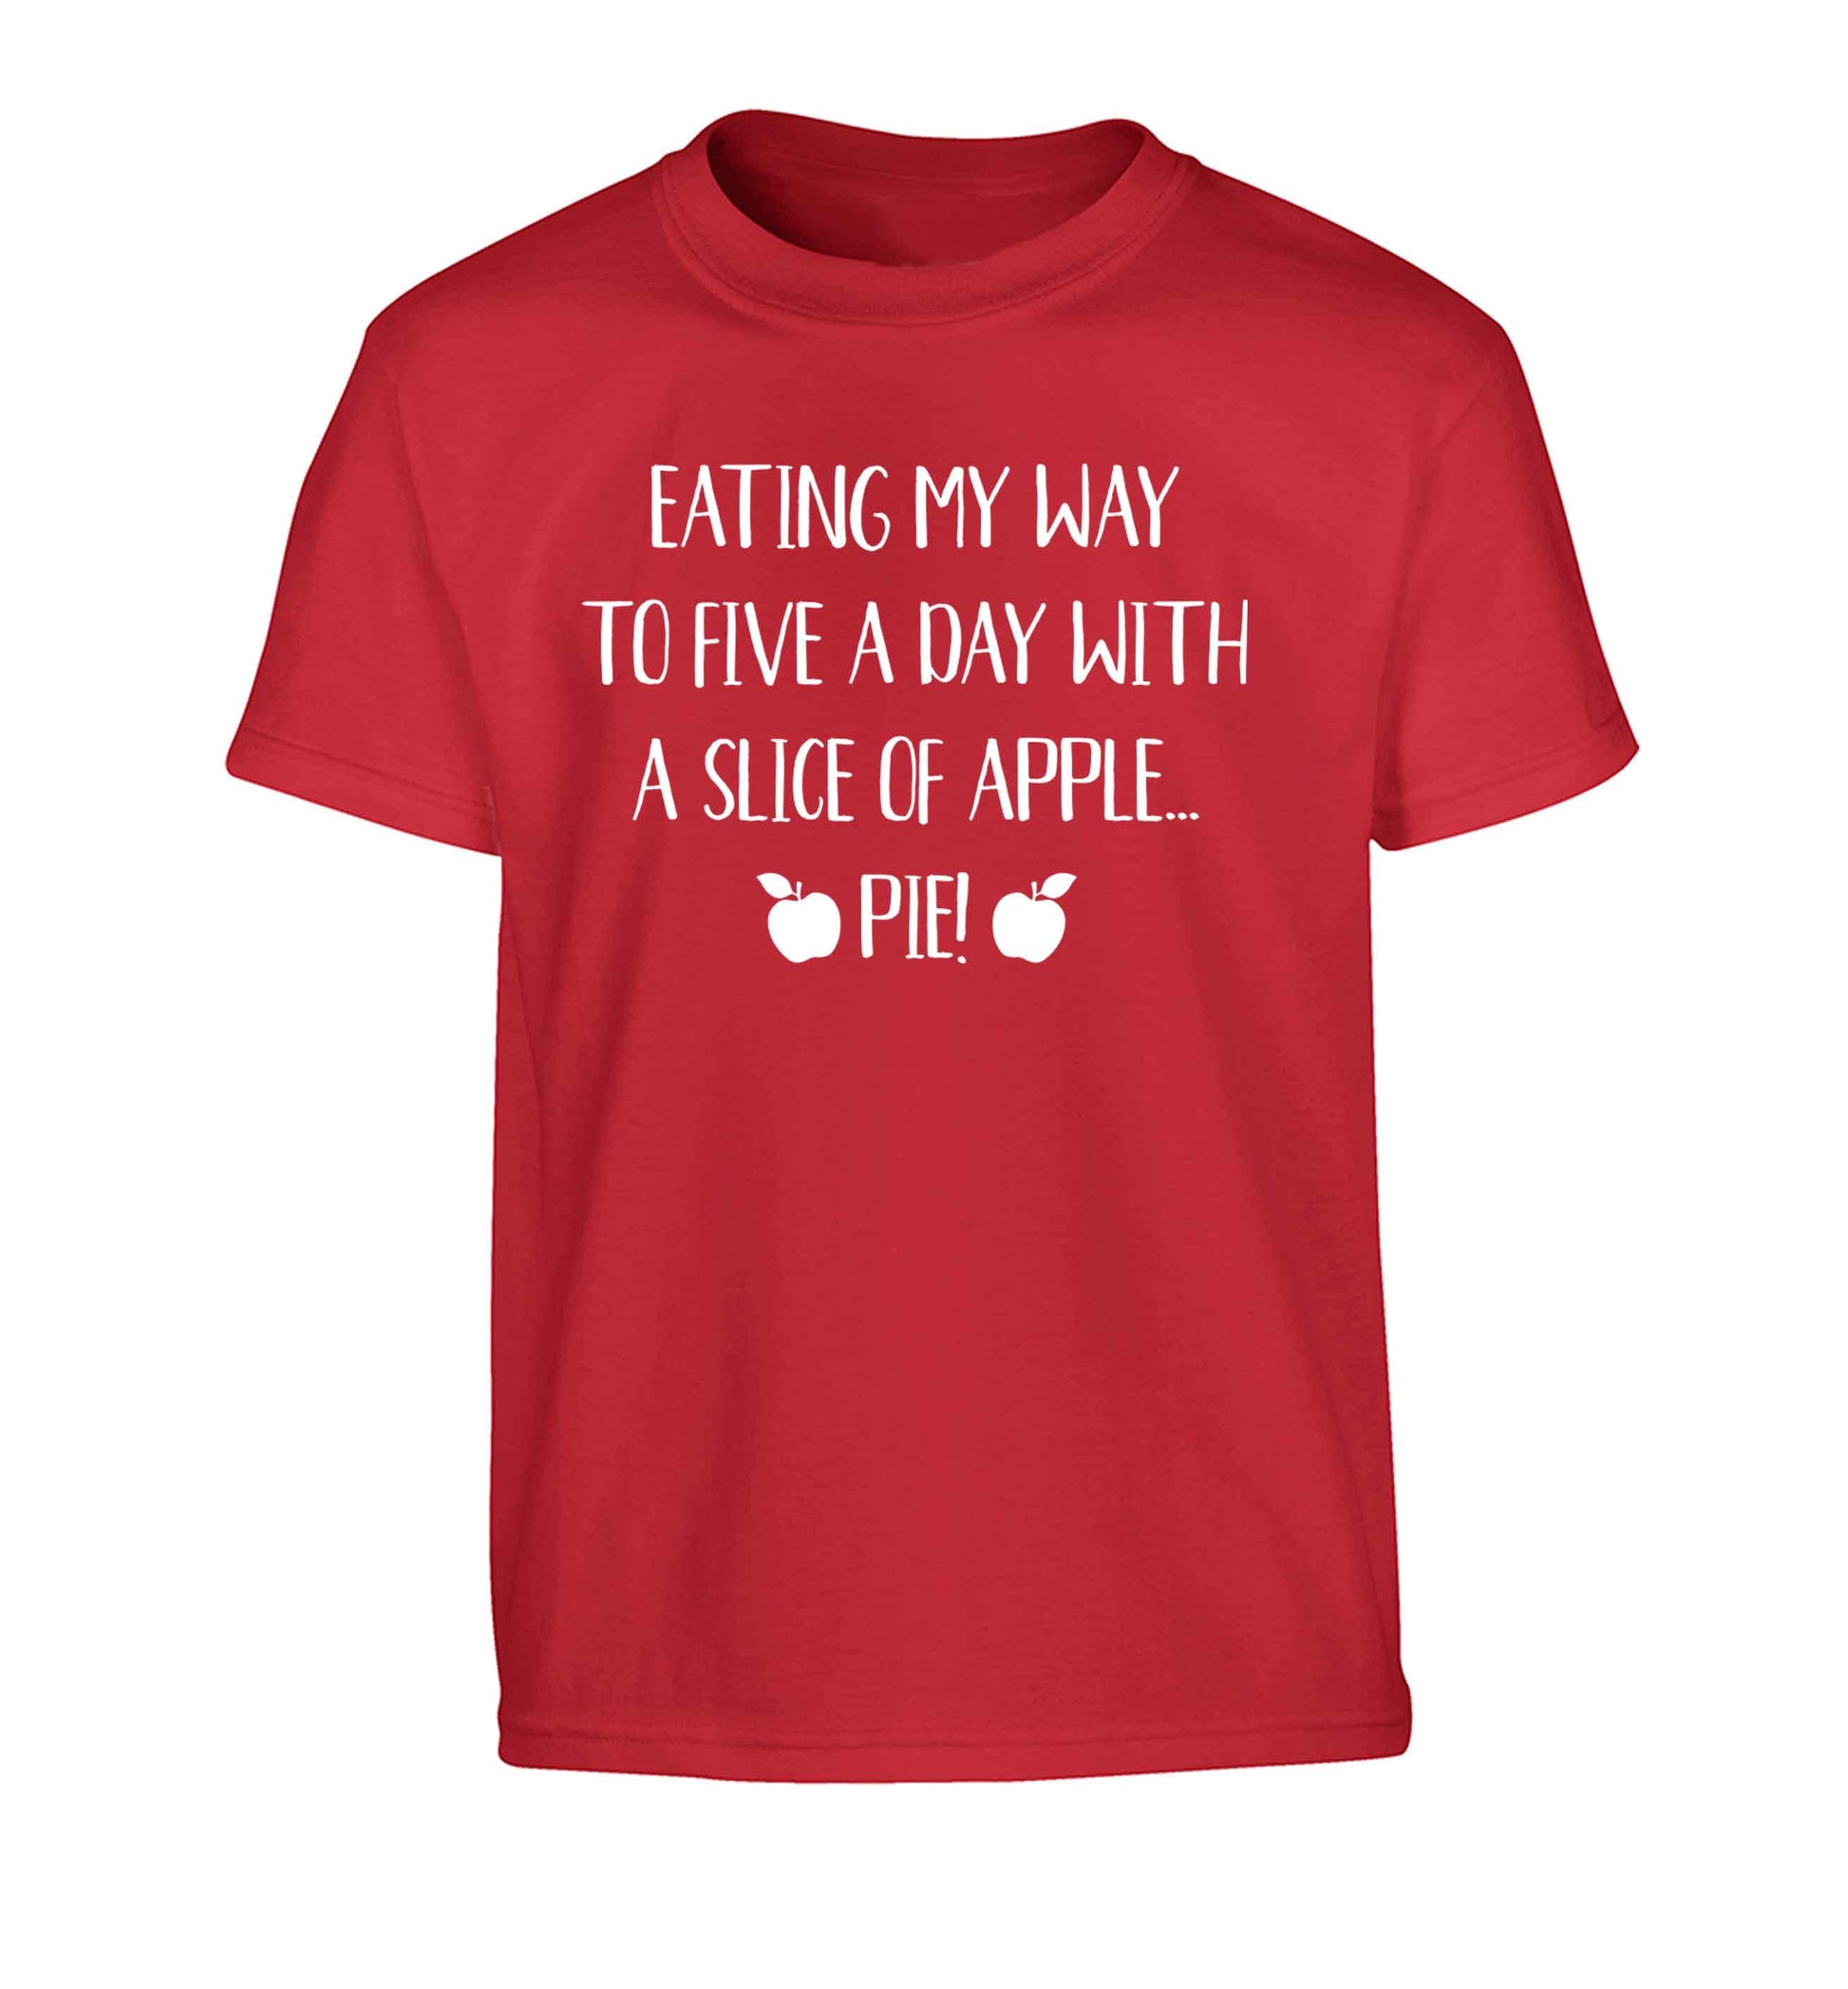 Eating my way to five a day with a slice of apple pie Children's red Tshirt 12-13 Years